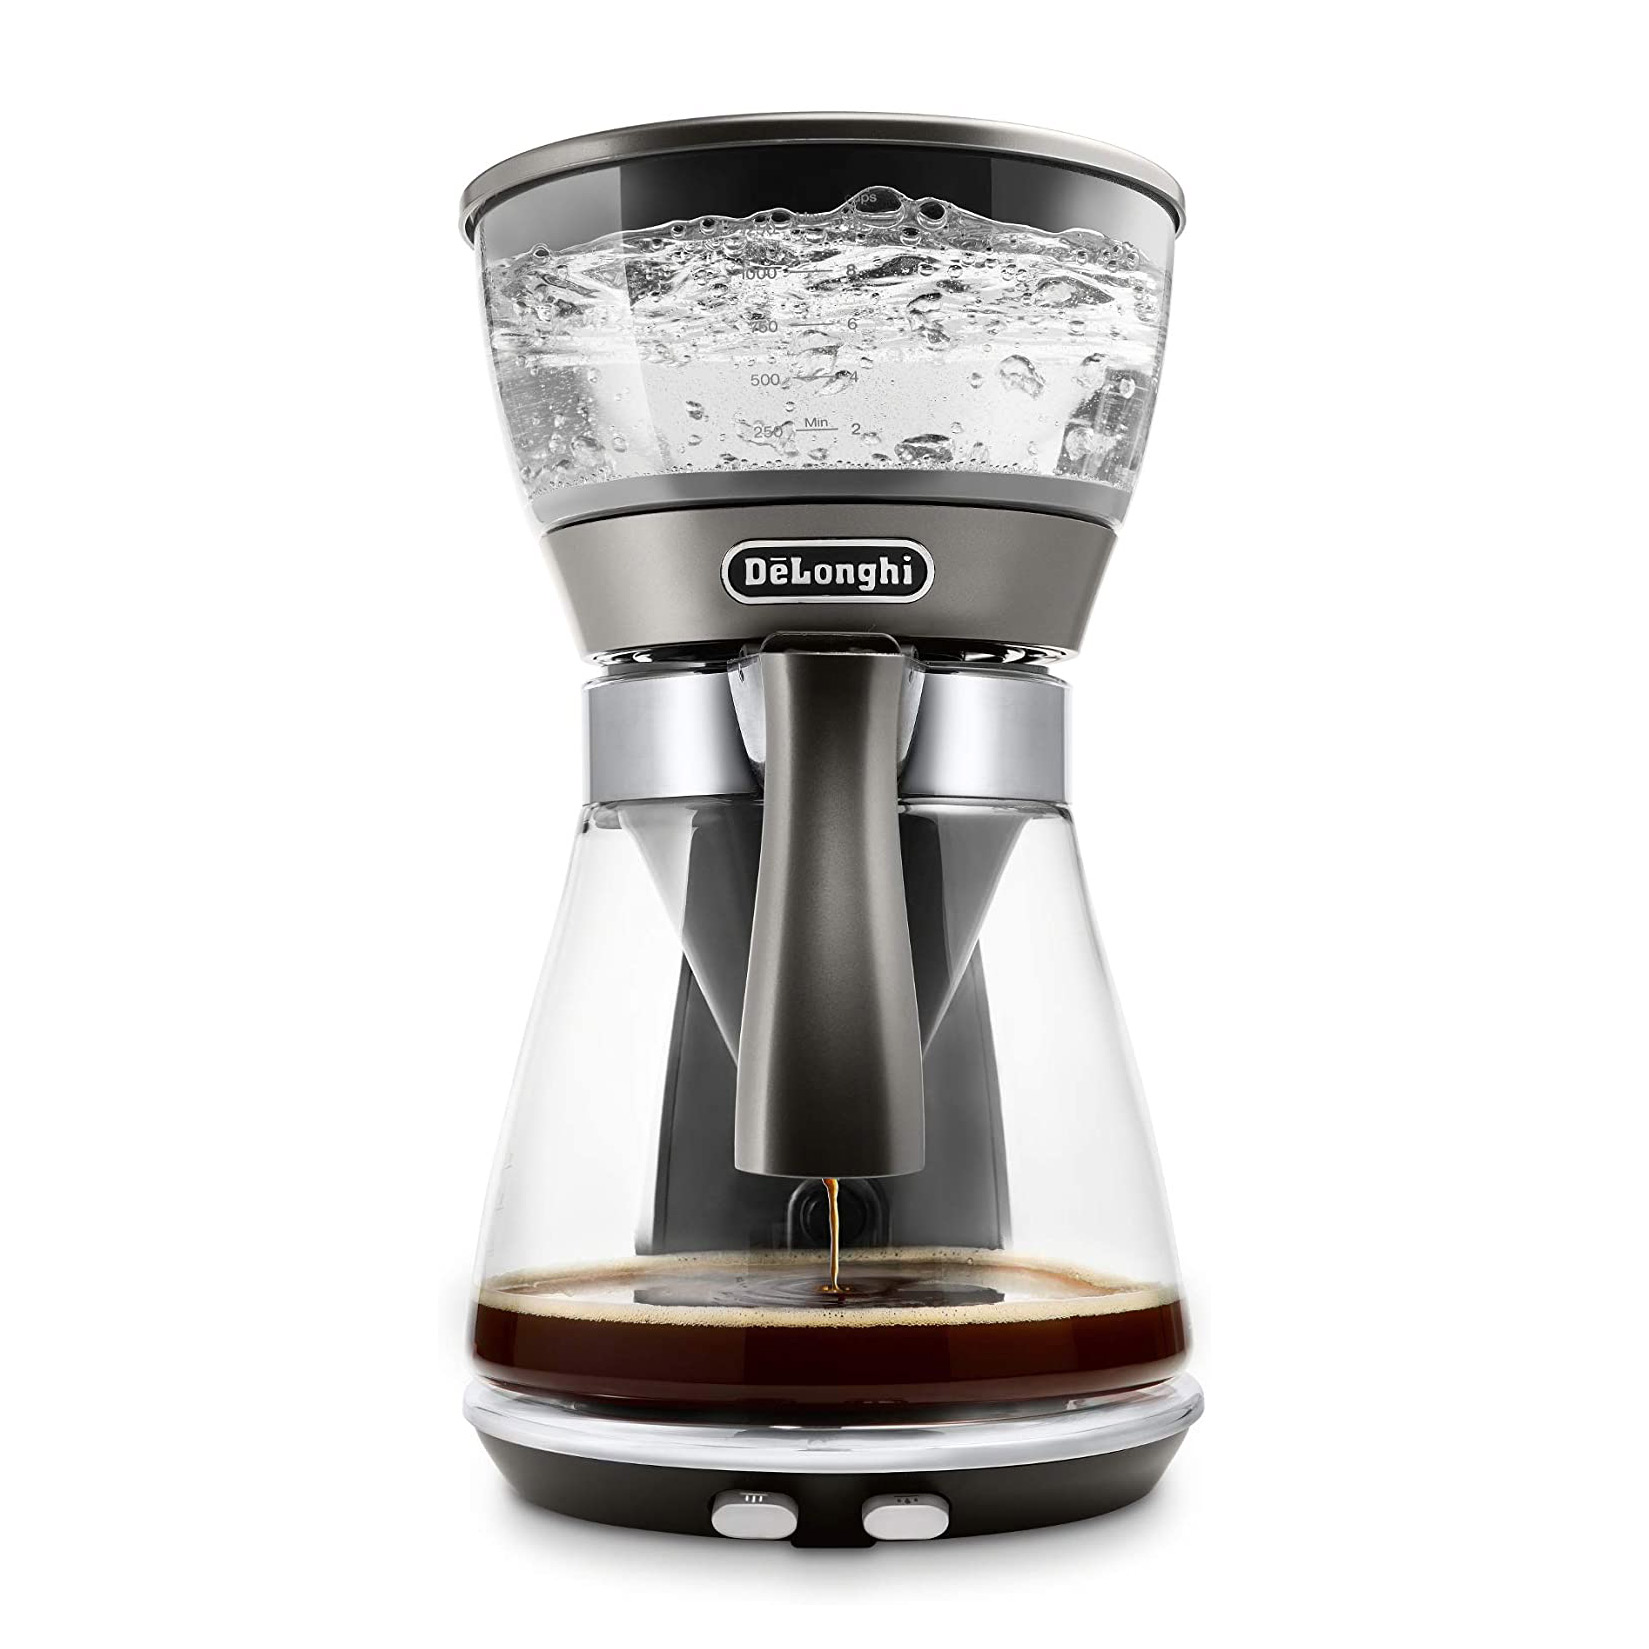 DeLonghi 3-in-1 Specialty 8 Cup Coffee Brewer - ICM17270